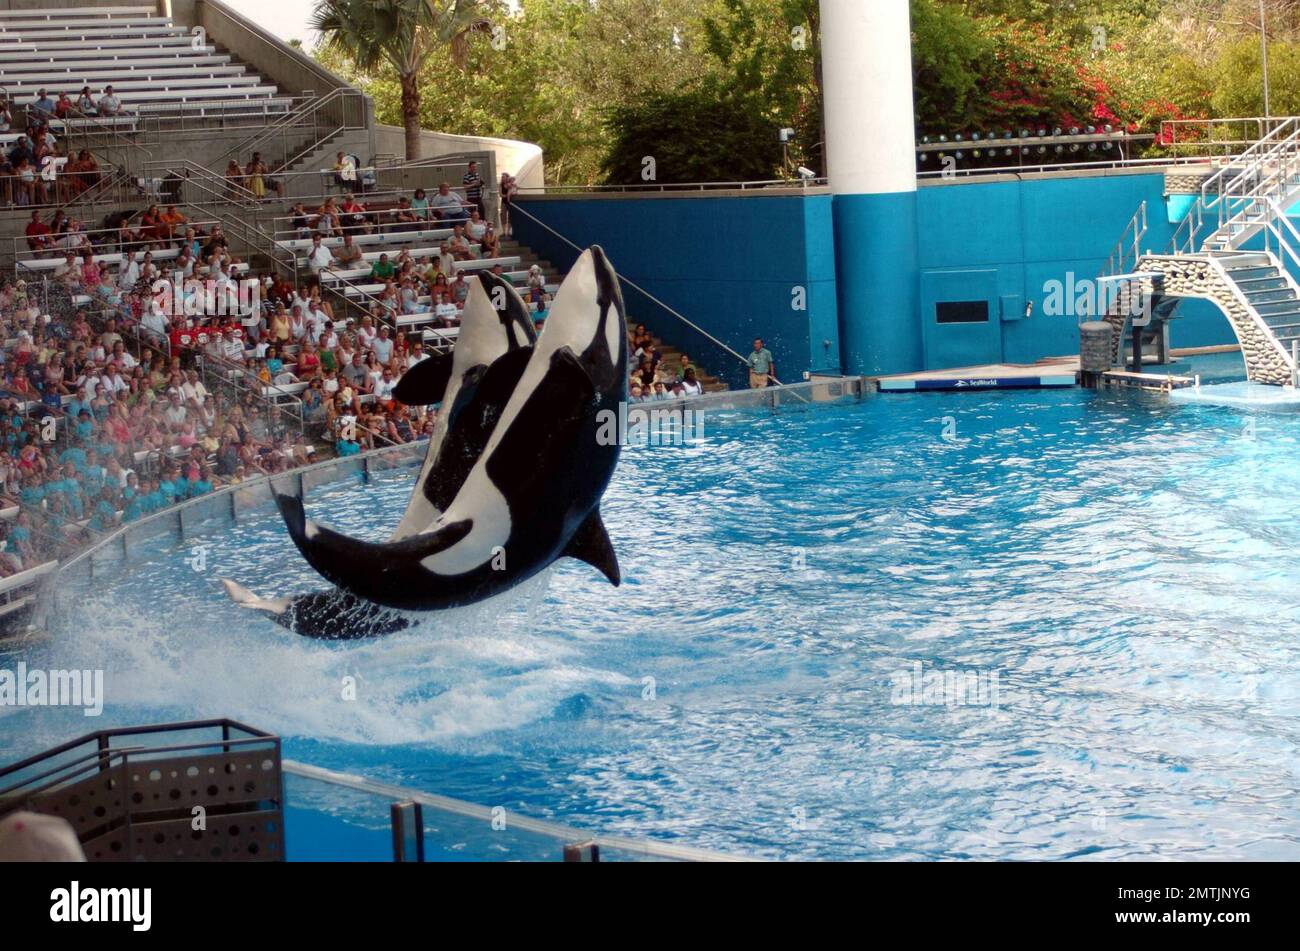 General views of the Sea World Park where trainer Dawn Brancheau, 40, was killed by a five-ton killer whale that grabbed the trainer after her hair brushed its nose and held her in its mouth beneath the water causing her to drown. The incident, witnessed by 50 tourists, was not the first for the whale, having killed a trainer at a park in British Columbia before moving to Sea World. Orlando, FL. 2/25/10. Stock Photo